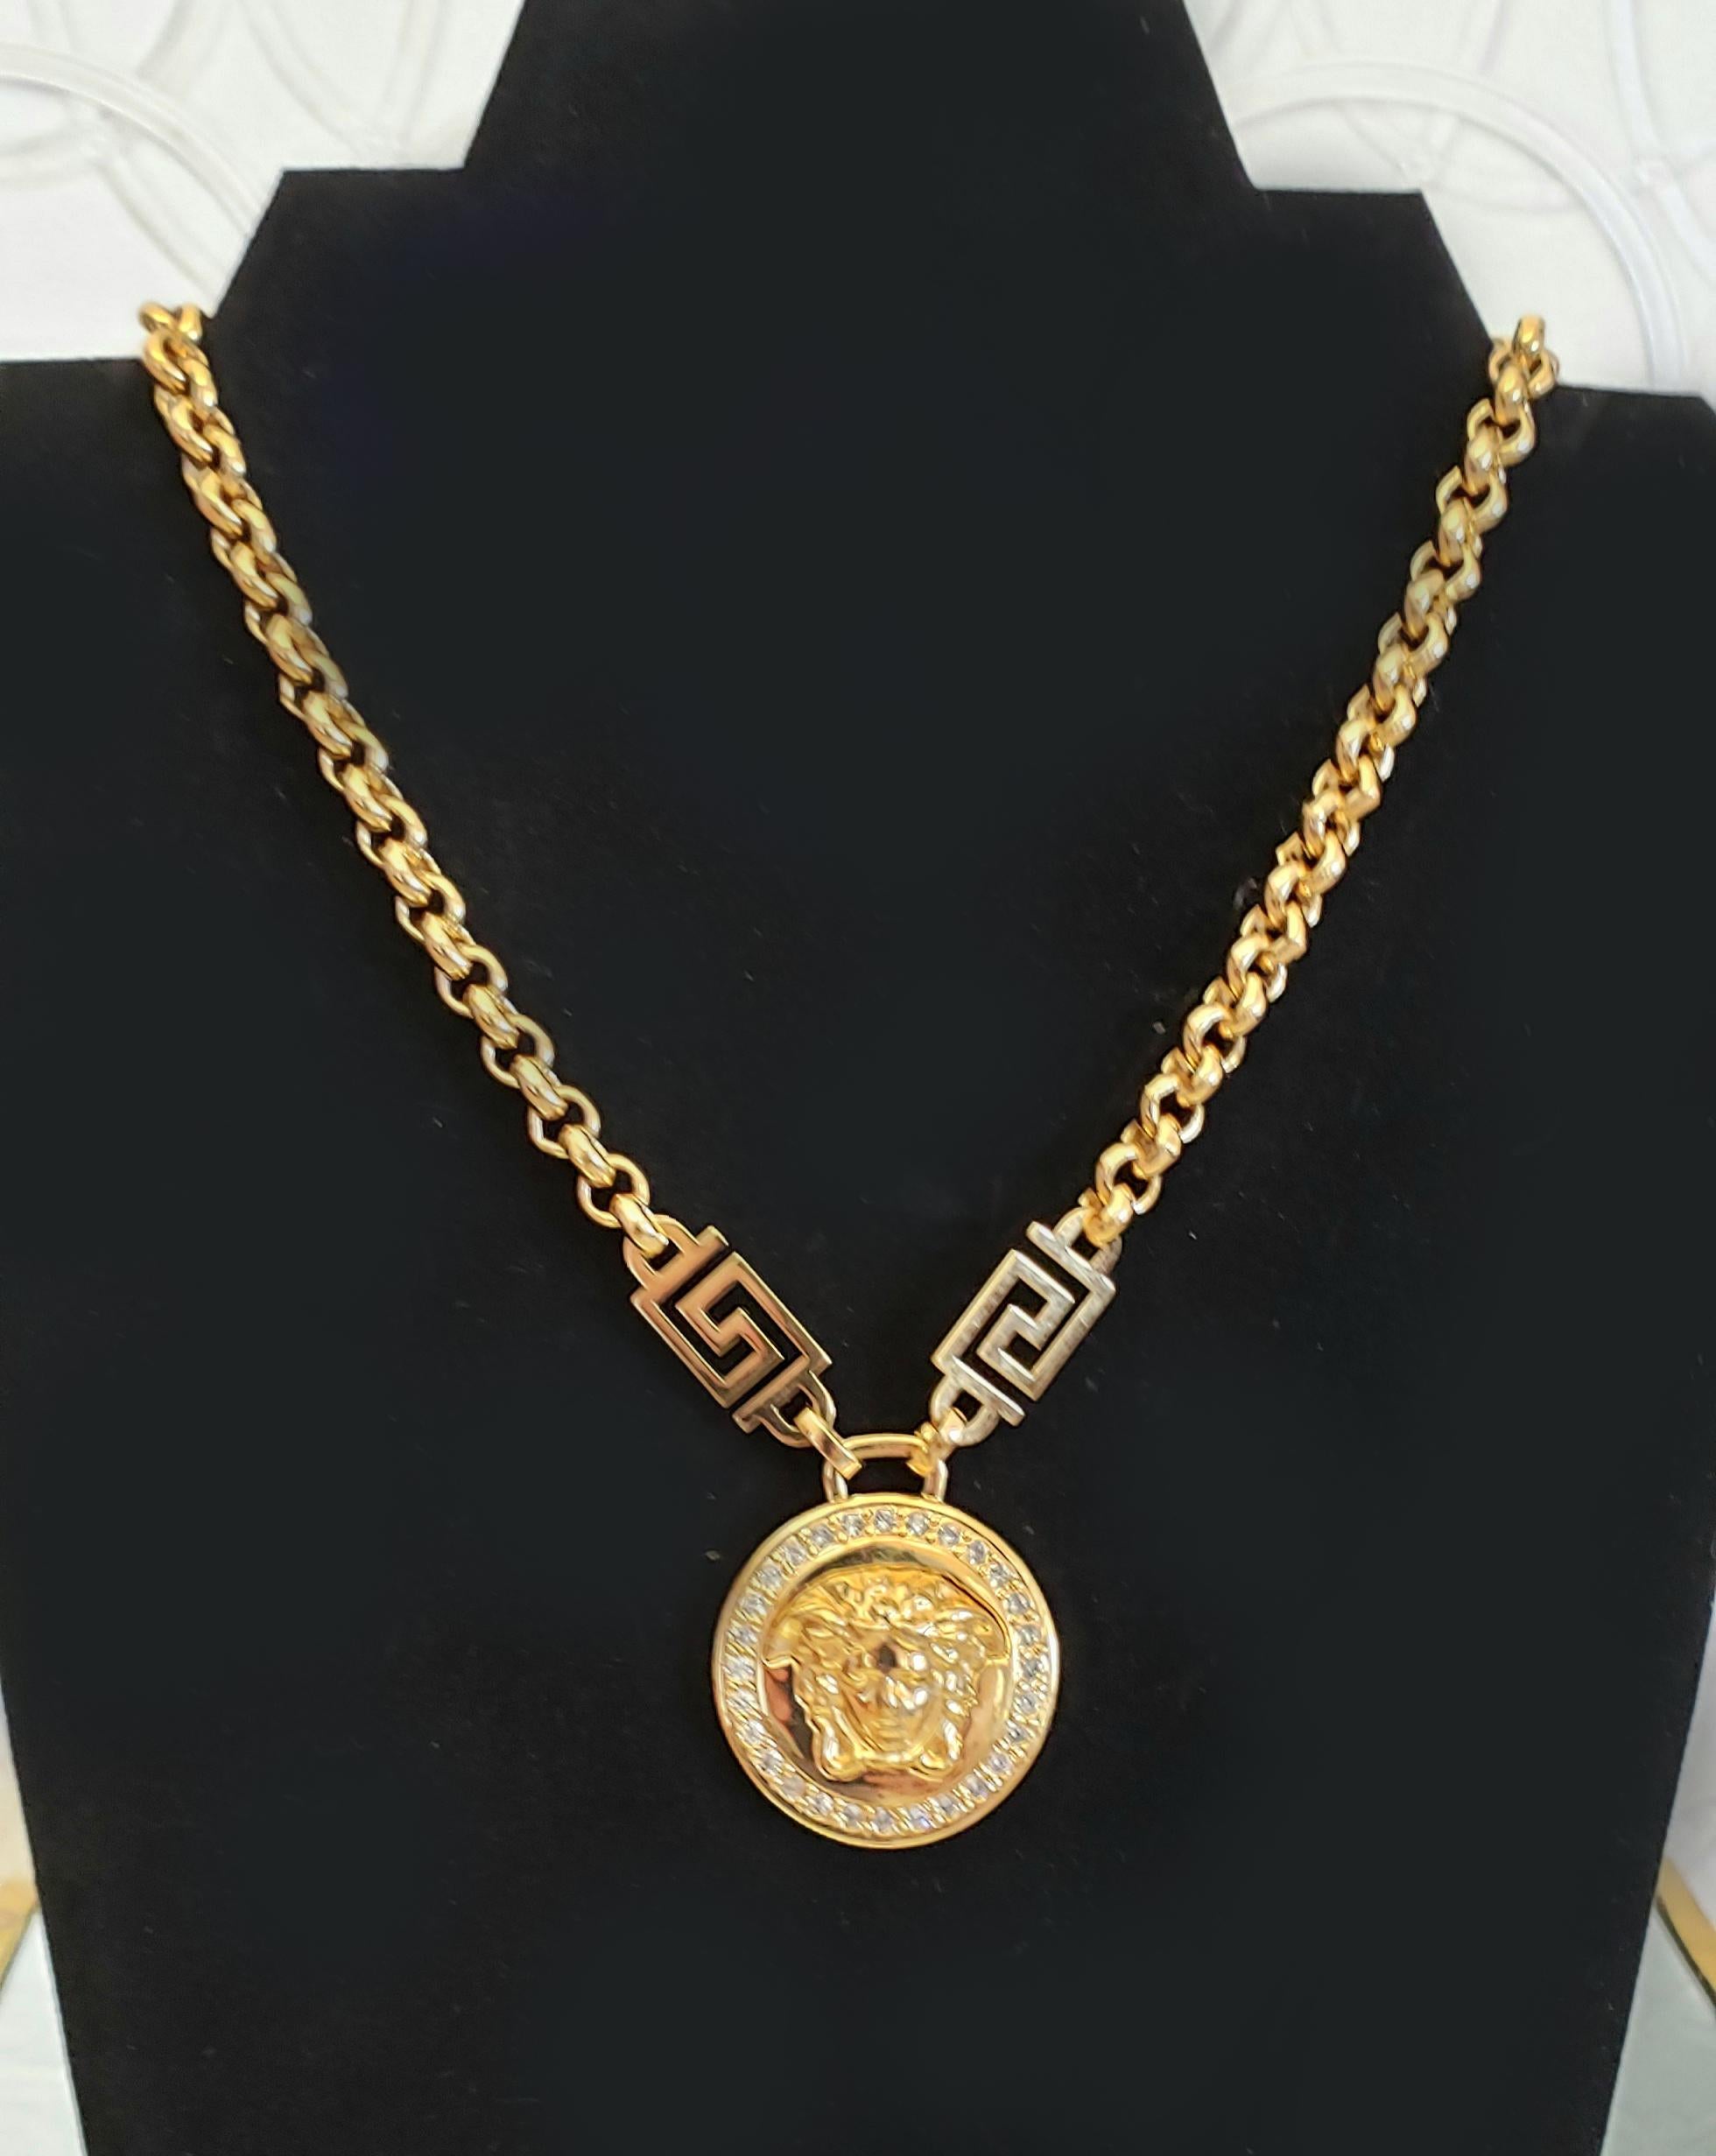 Women's or Men's VERSACE 24K GOLD PLATED CHAIN GREEK KEY CRYSTALL MEDUSA Necklace